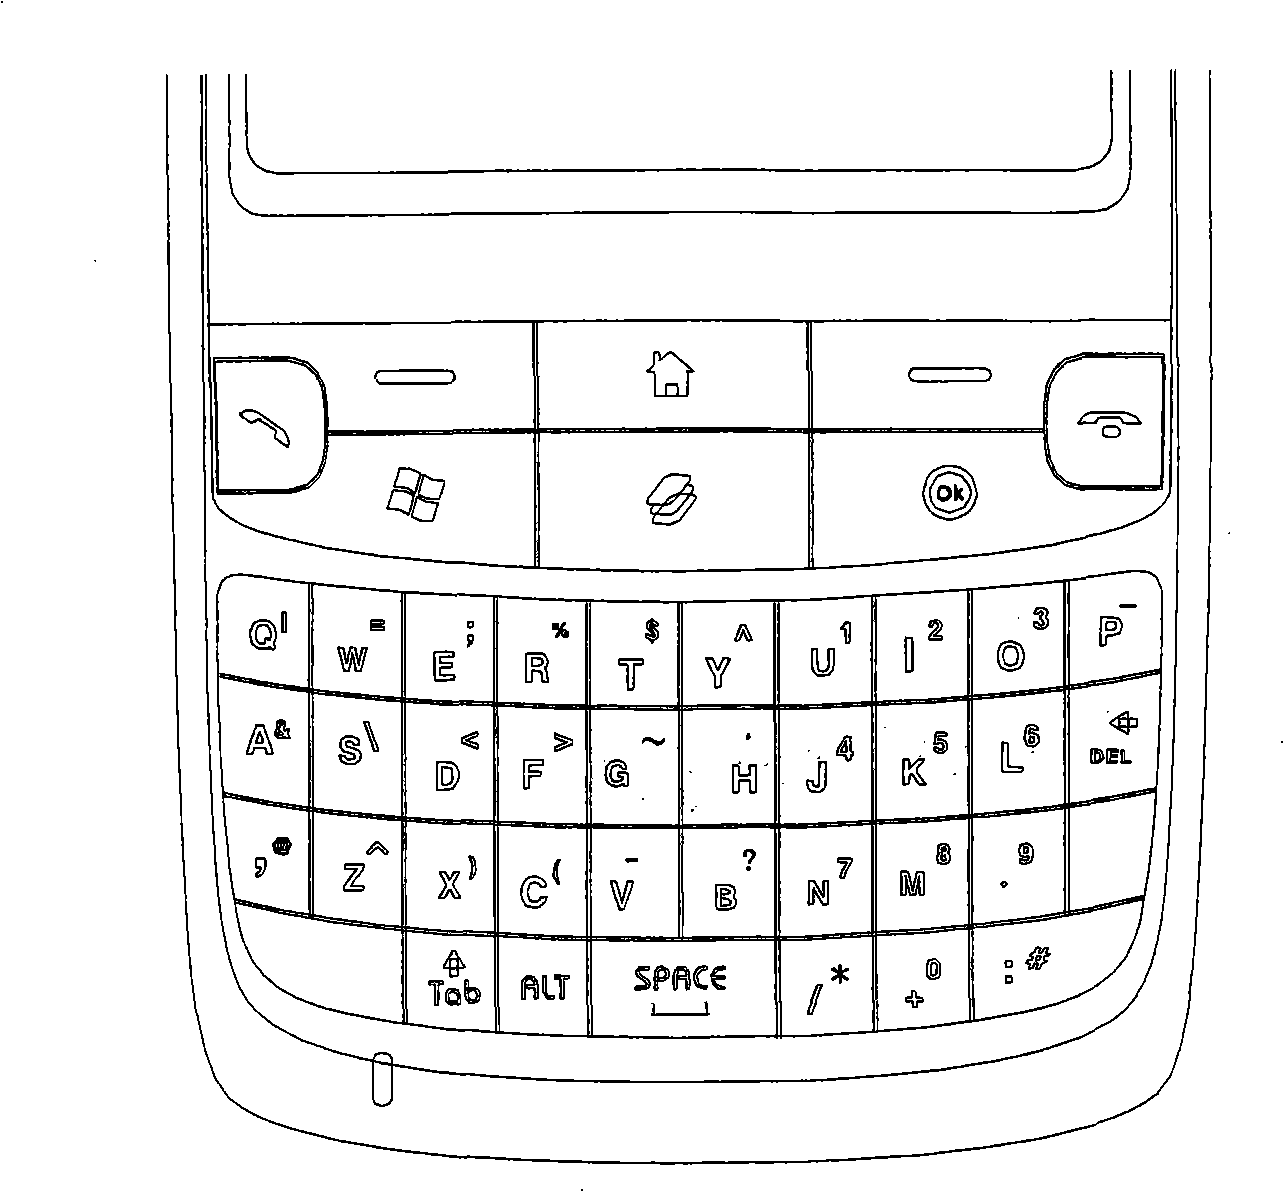 Keyboard device for handhold equipment capable of lighting with various areas